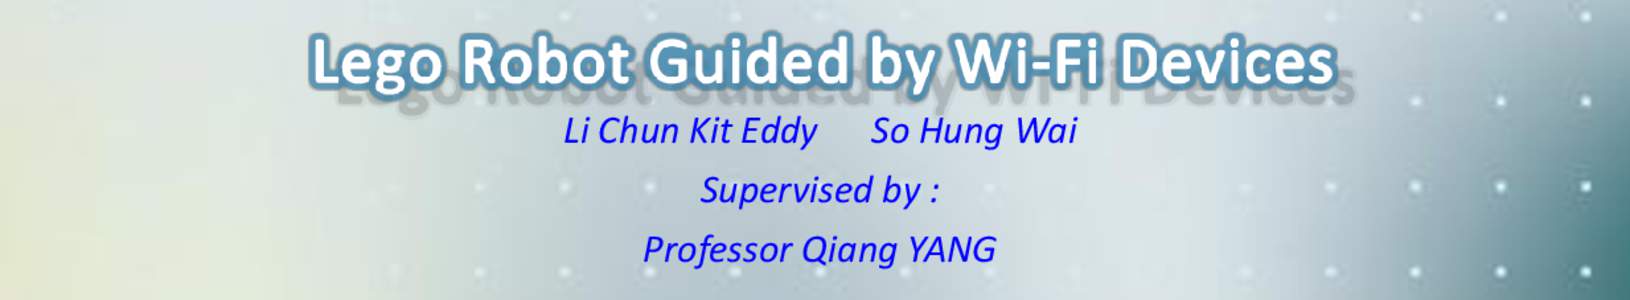 Li Chun Kit Eddy So Hung Wai Supervised by : Professor Qiang YANG 1. Introduction Indoor localization is a technique used to